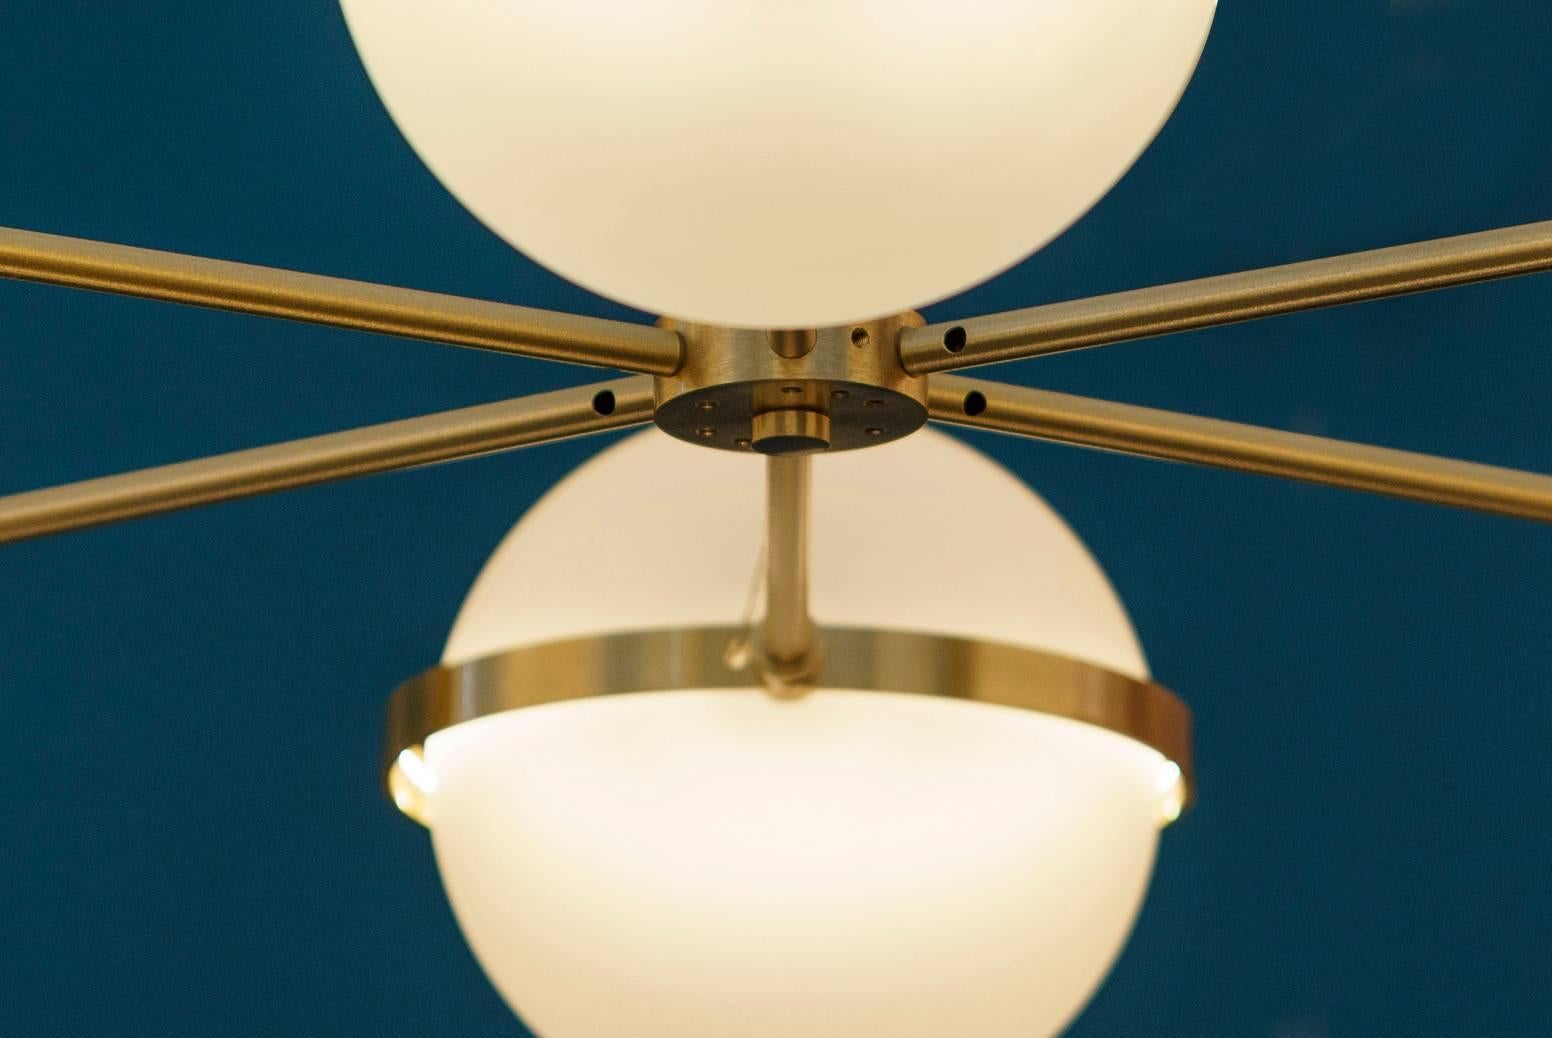 The Polaris LT 55 Pendant belongs to the Flexus series by Baroncelli.

Flexus is a lighting system that comprises a palette of abstracted lines, curves and circles. Echoing the language of Modernist modular thinking, it captures the desire to